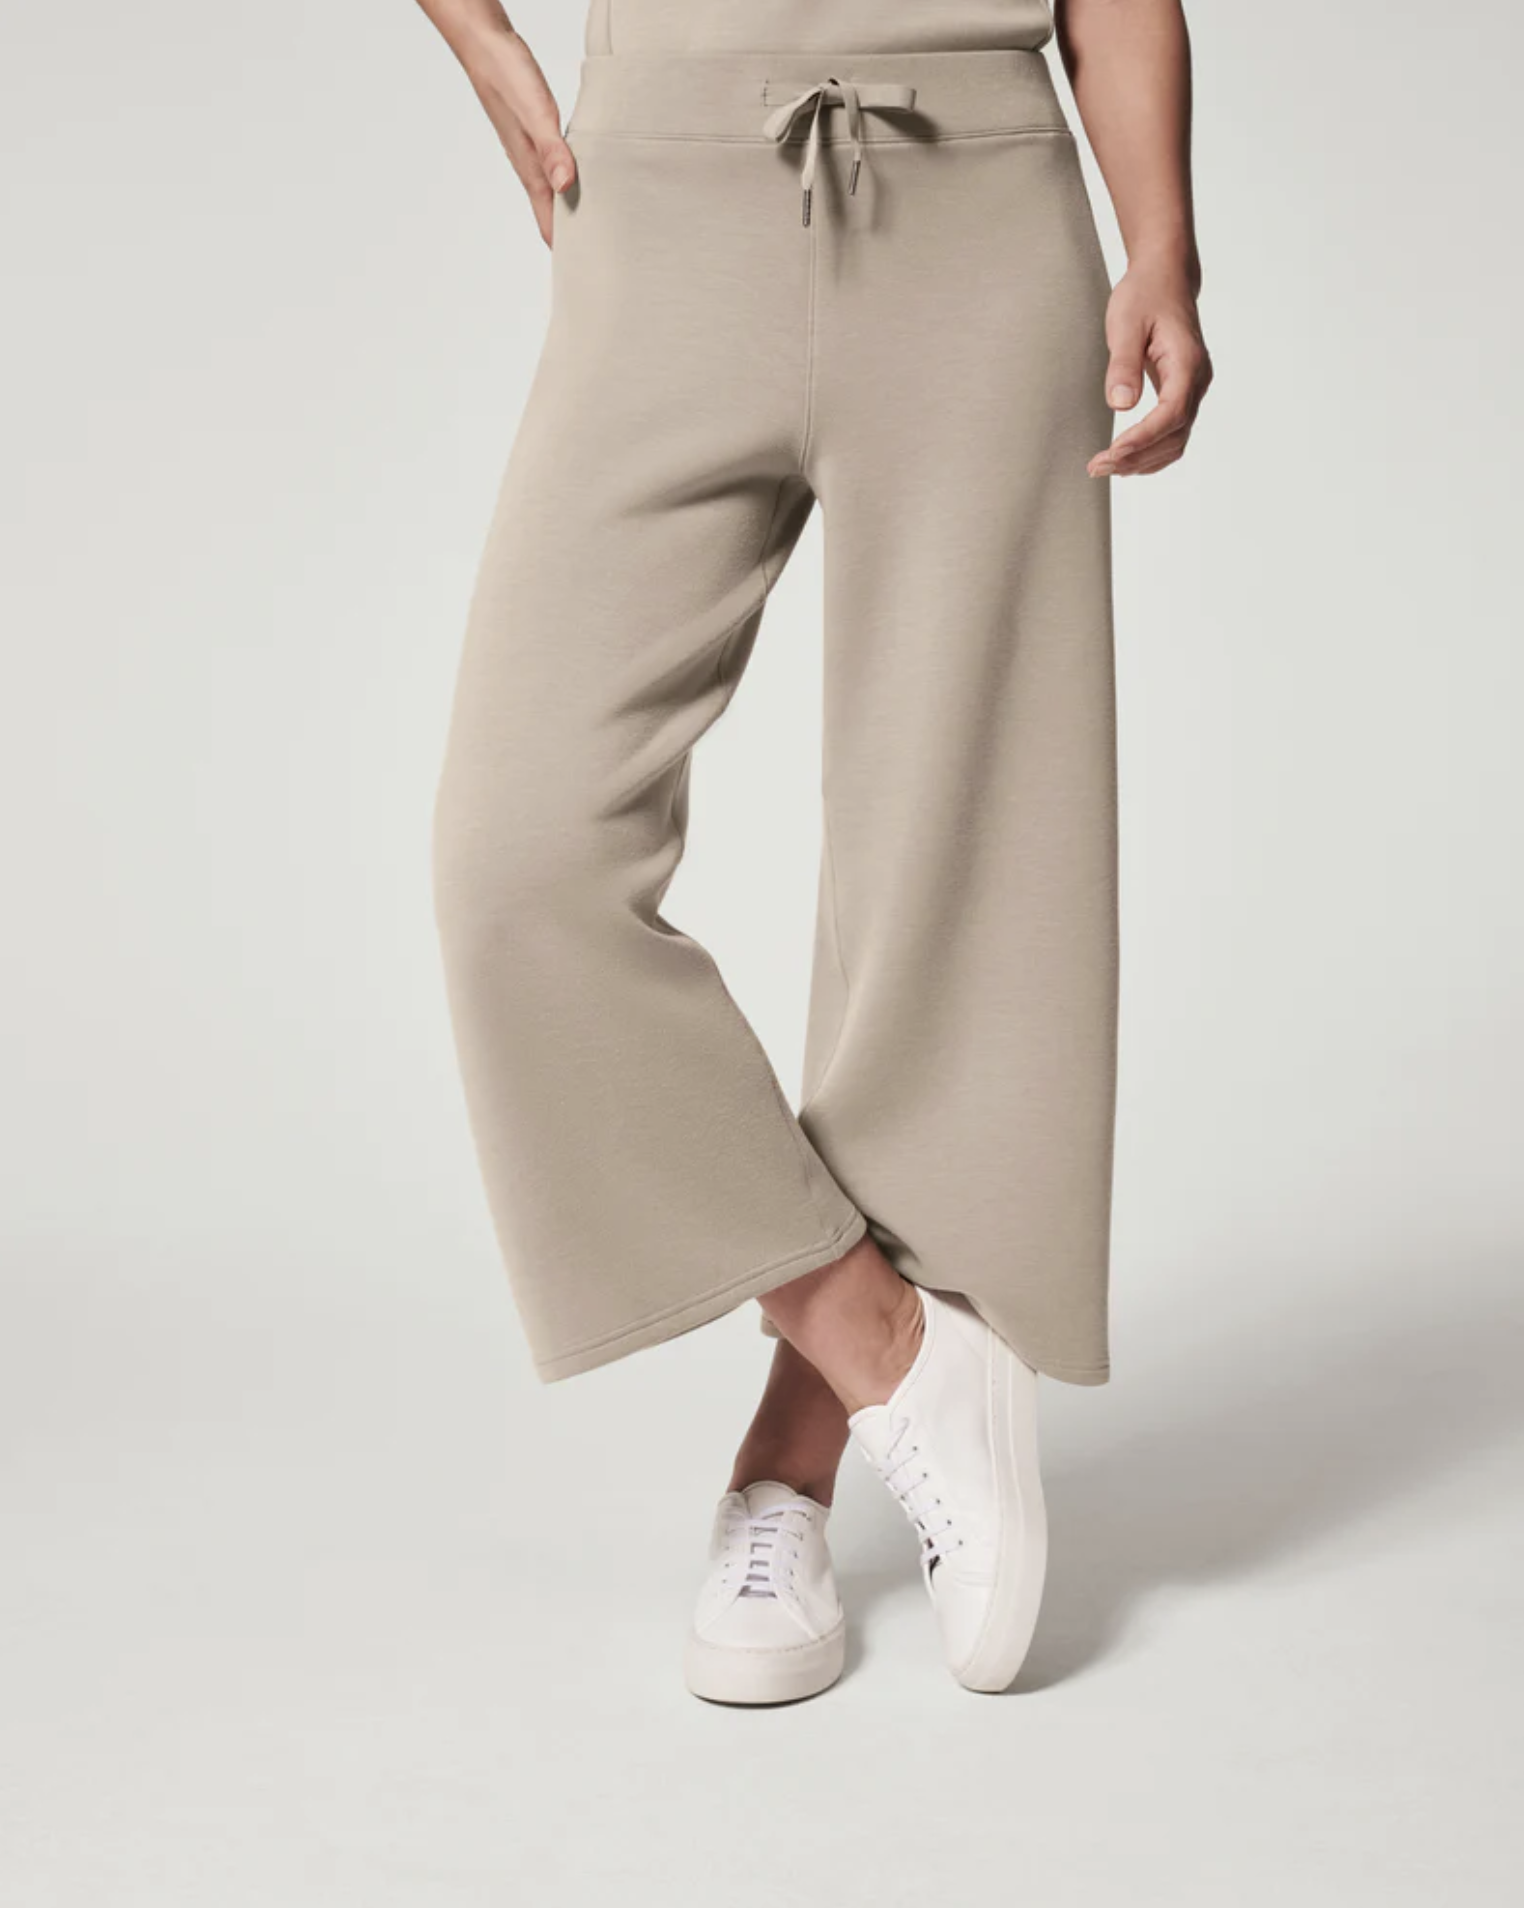 Spanx AirEssentials Cropped Wide Leg Pant in Fawn - Busbee - Fashion Over 40